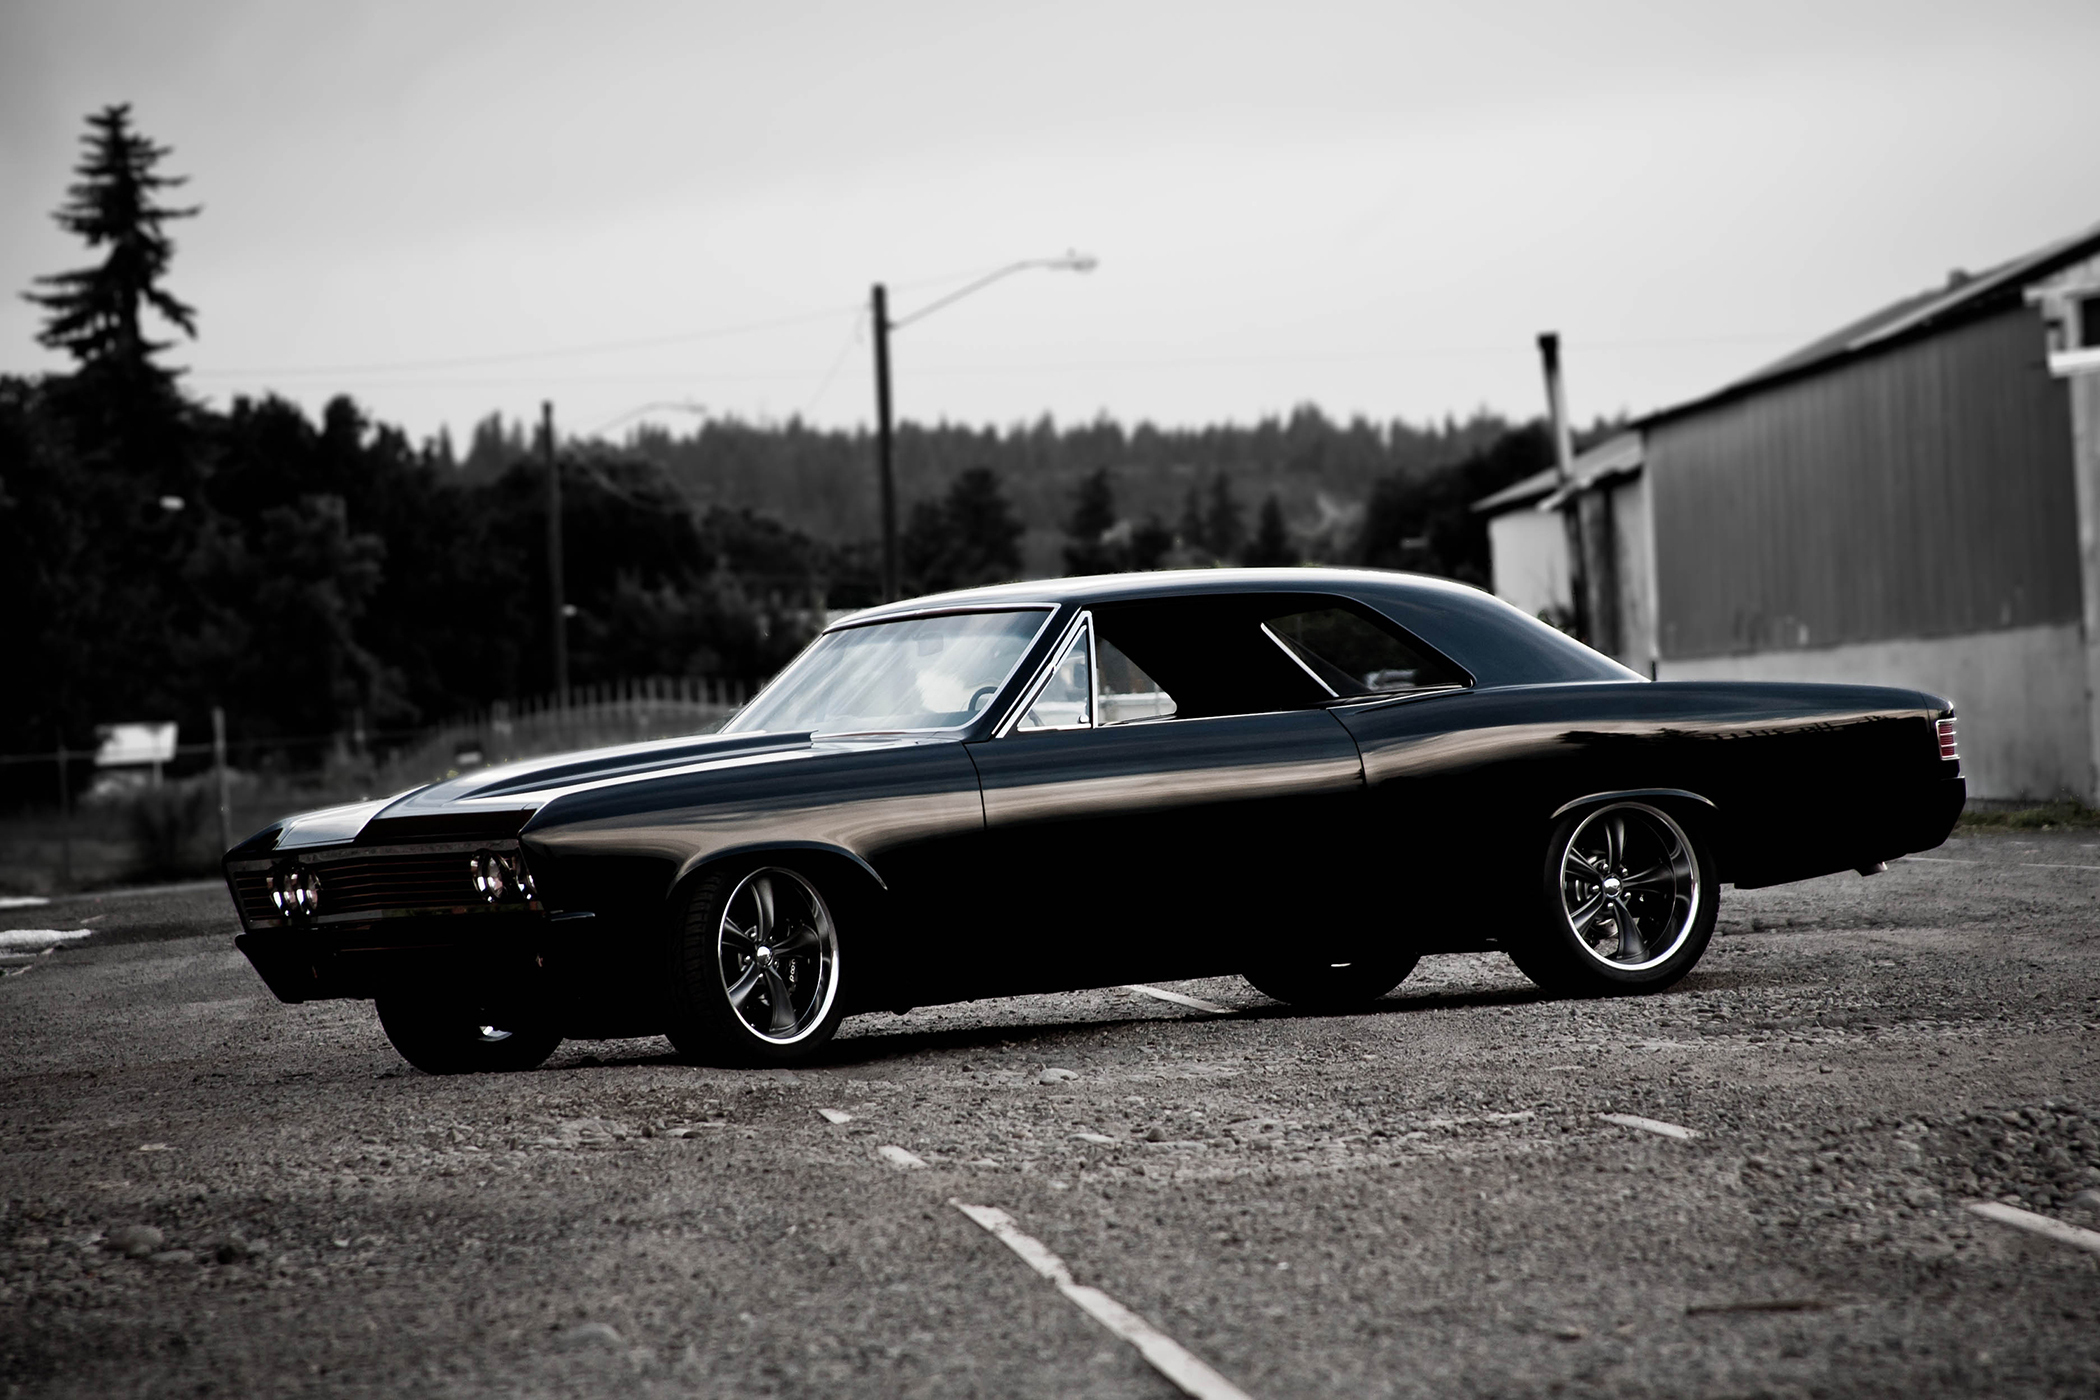 chevrolet, Chevelle, Ss, 1967, Chevy, Hot rod, Muscle car, Classic car ... Muscle Car Wallpaper 1920x1080